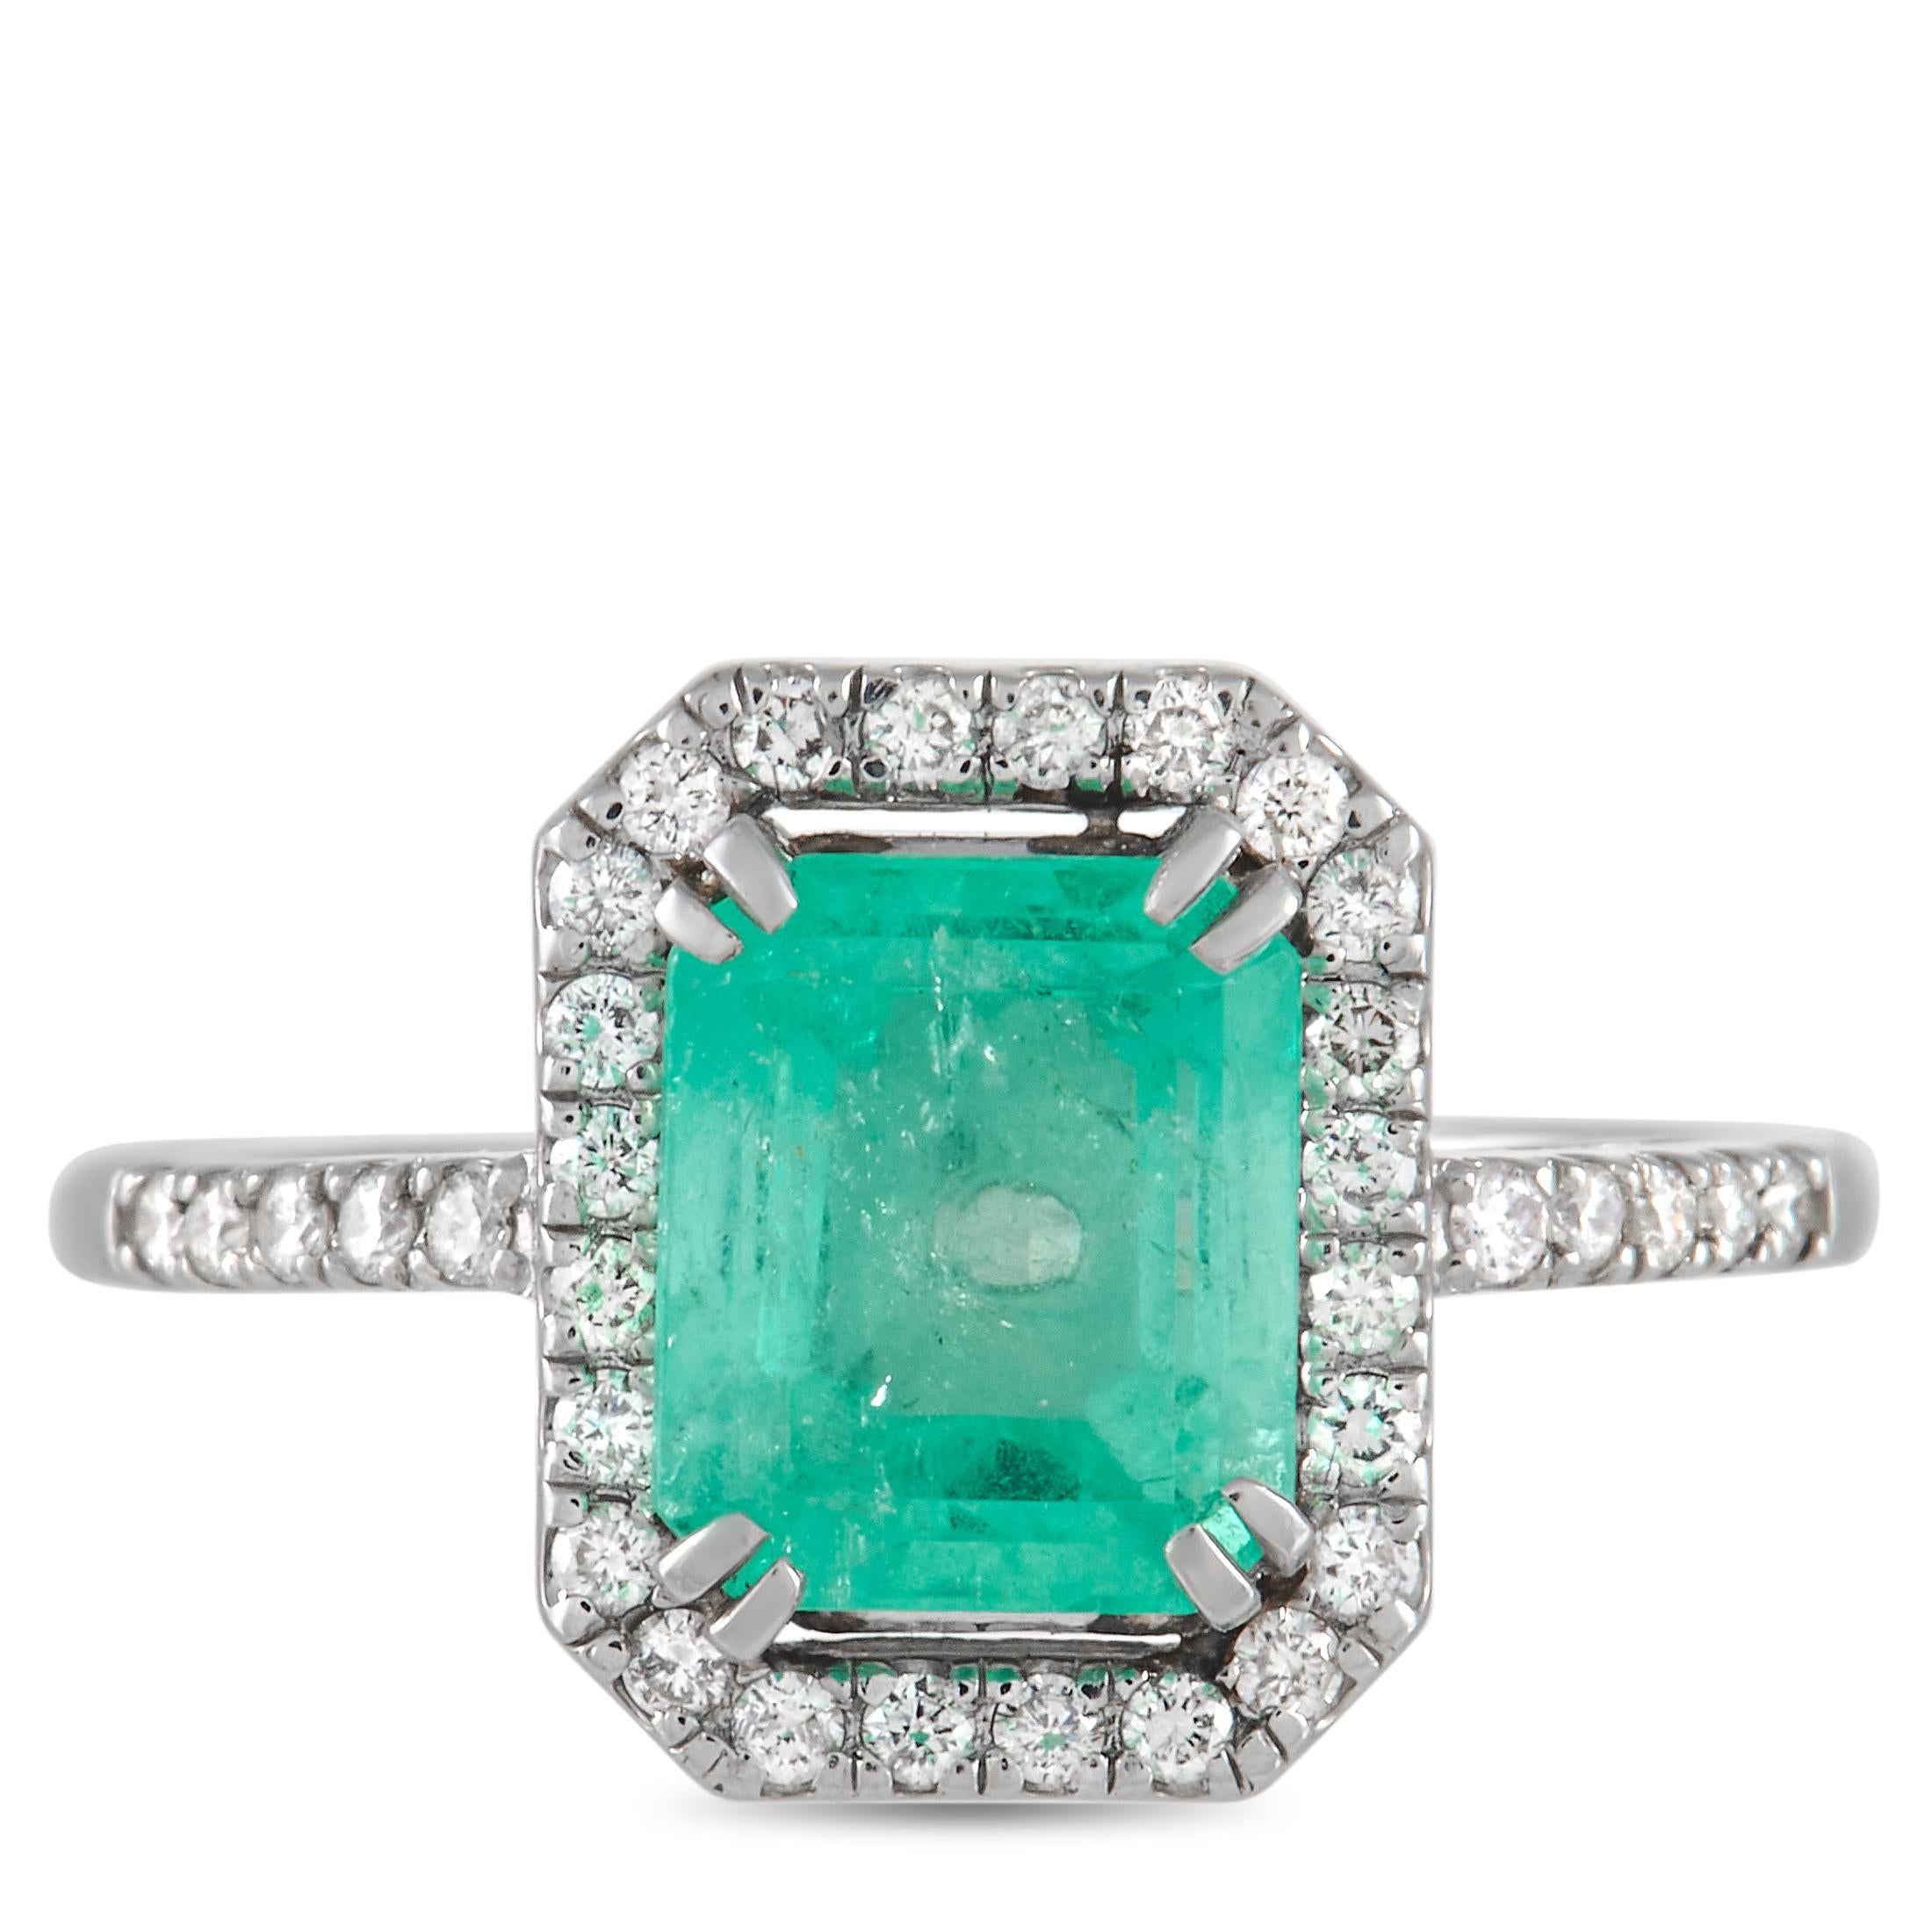 Mixed Cut LB Exclusive Platinum 0.27 Ct Diamond and Emerald Ring